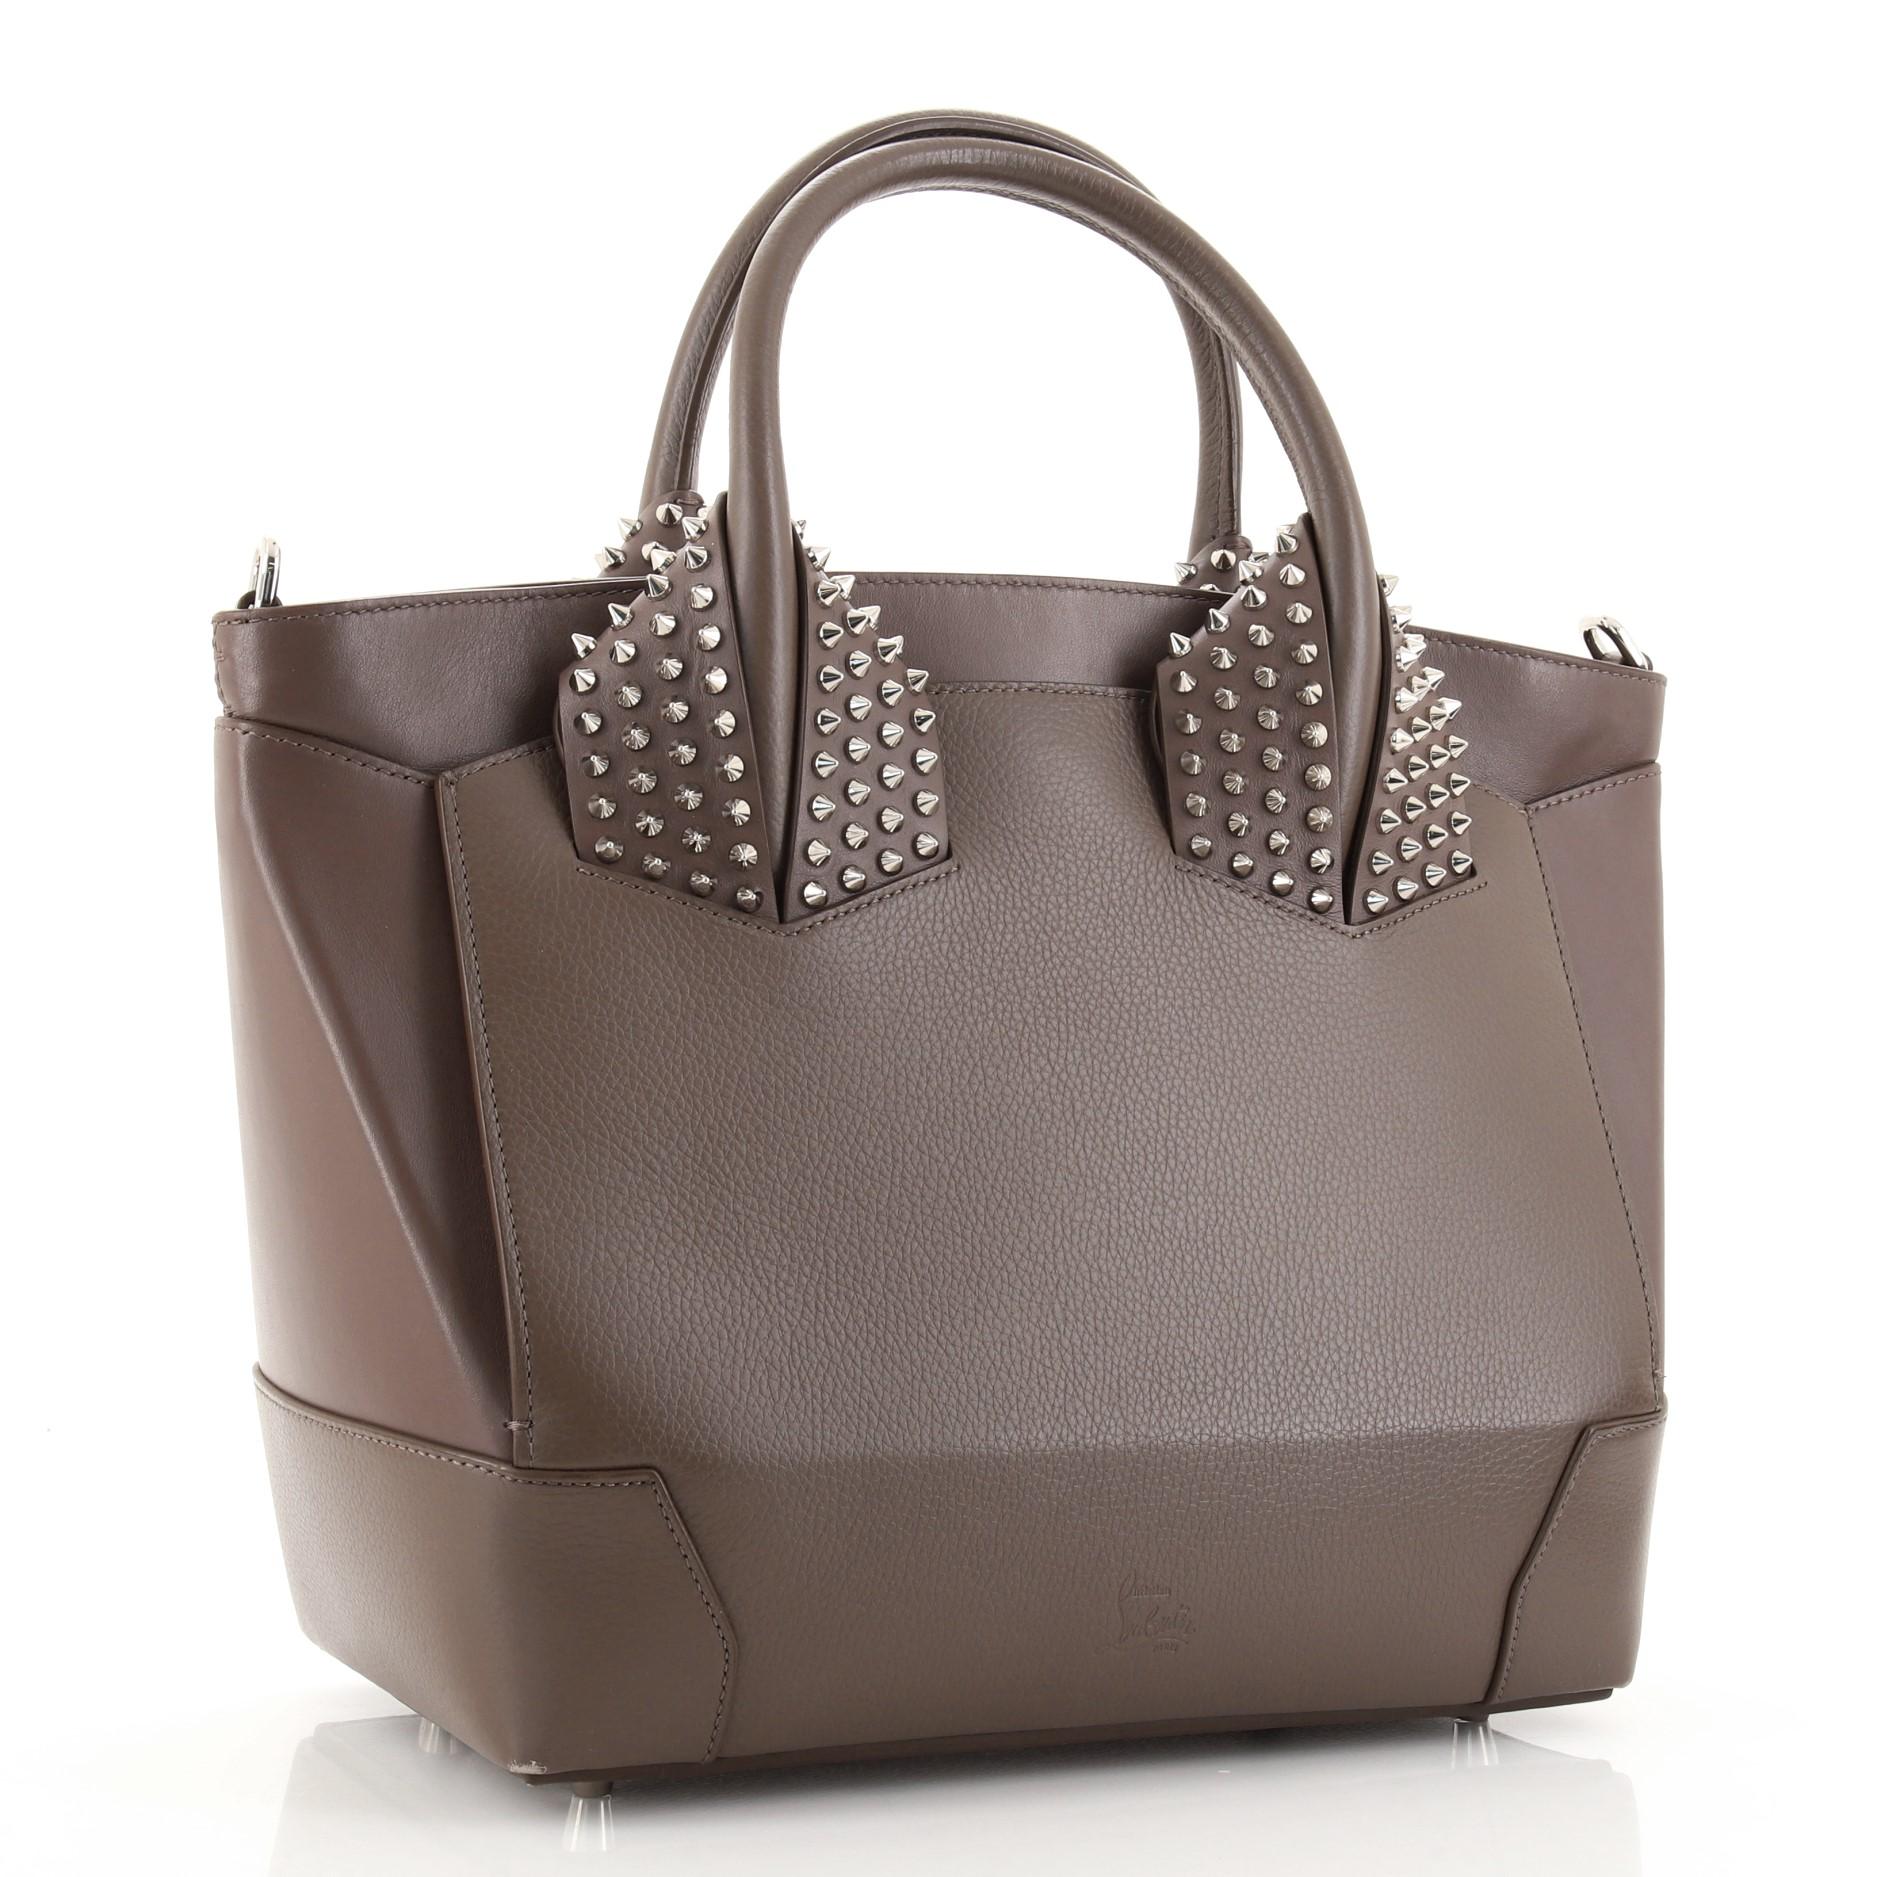 Gray Christian Louboutin Eloise Satchel Spiked Leather Large